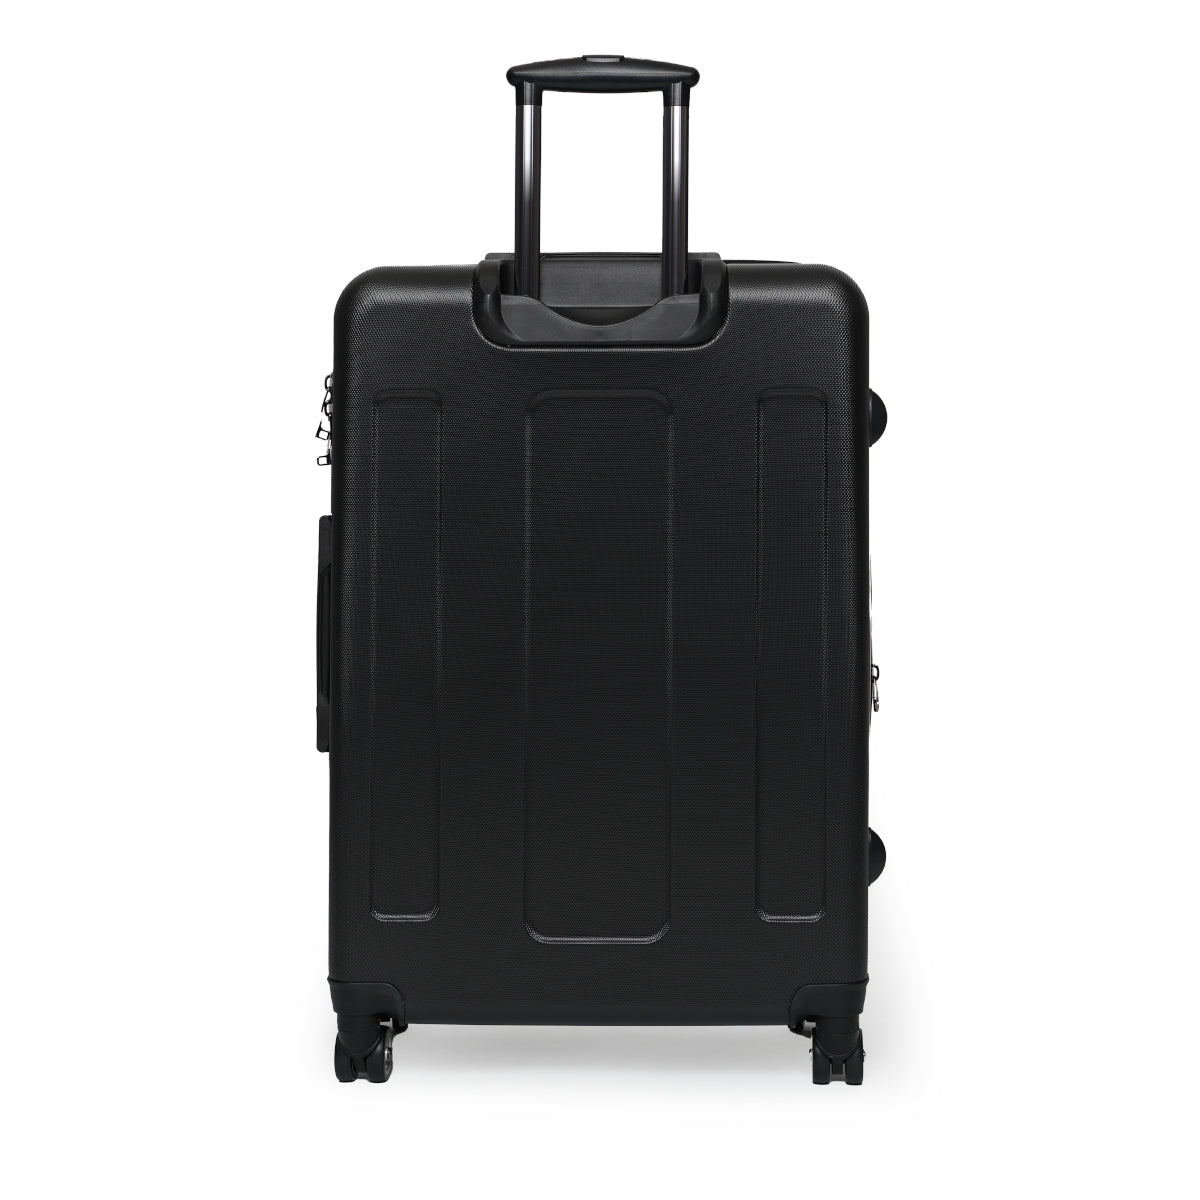 Getrott Belshazzars Feast by Rembrandt Black Cabin Suitcase Extended Storage Adjustable Telescopic Handle Double wheeled Polycarbonate Hard-shell Built-in Lock-Bags-Geotrott